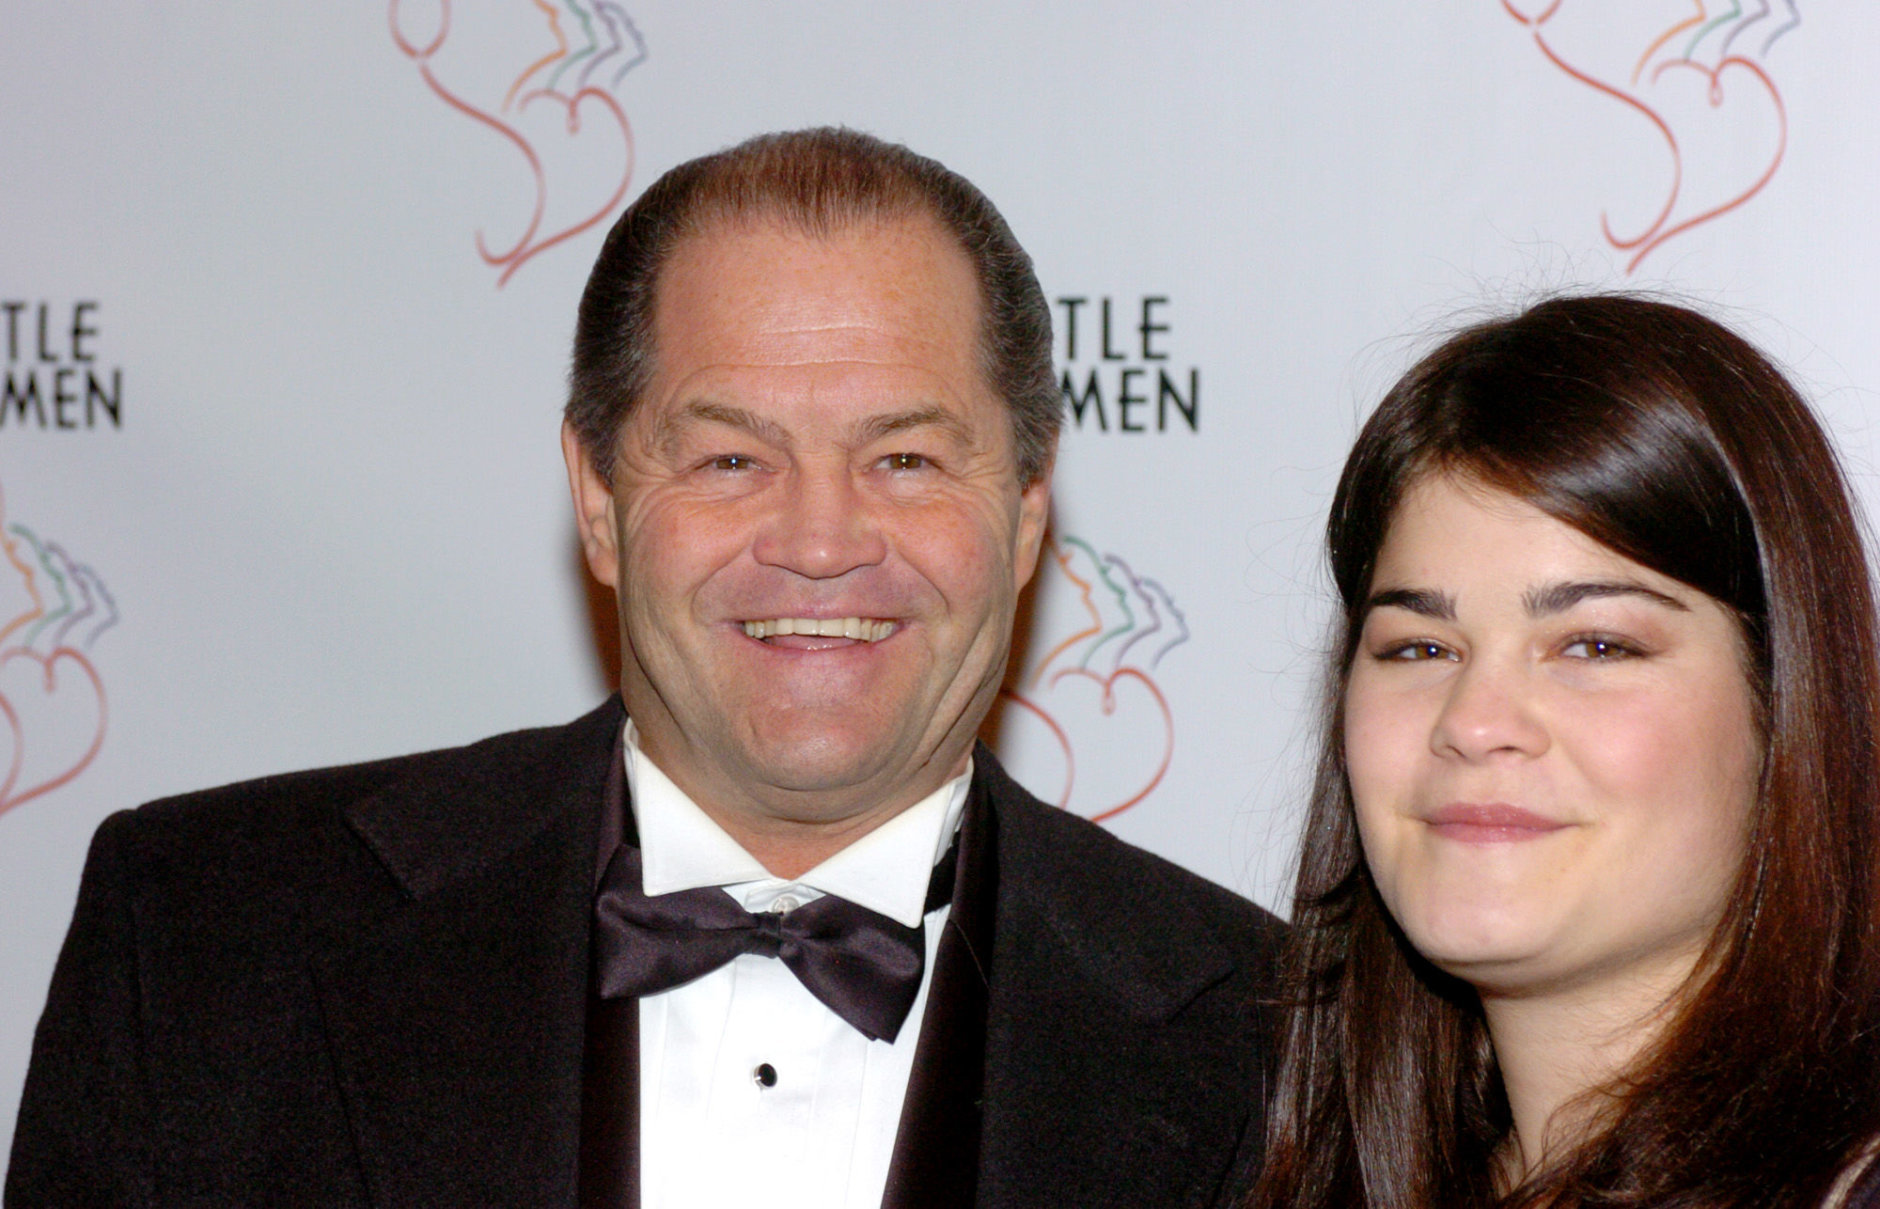 Former member of the sixties pop group "The Monkees" Mickey Dolenz arrives with his daughter Emily for the opening night at the Broadway show "Little Women" on Sunday, January 23, 2005, at the Virgina Theatre in New York. The show opened as planned despite a blizzard over the weekend.  (AP Photo/Gina Gayle)